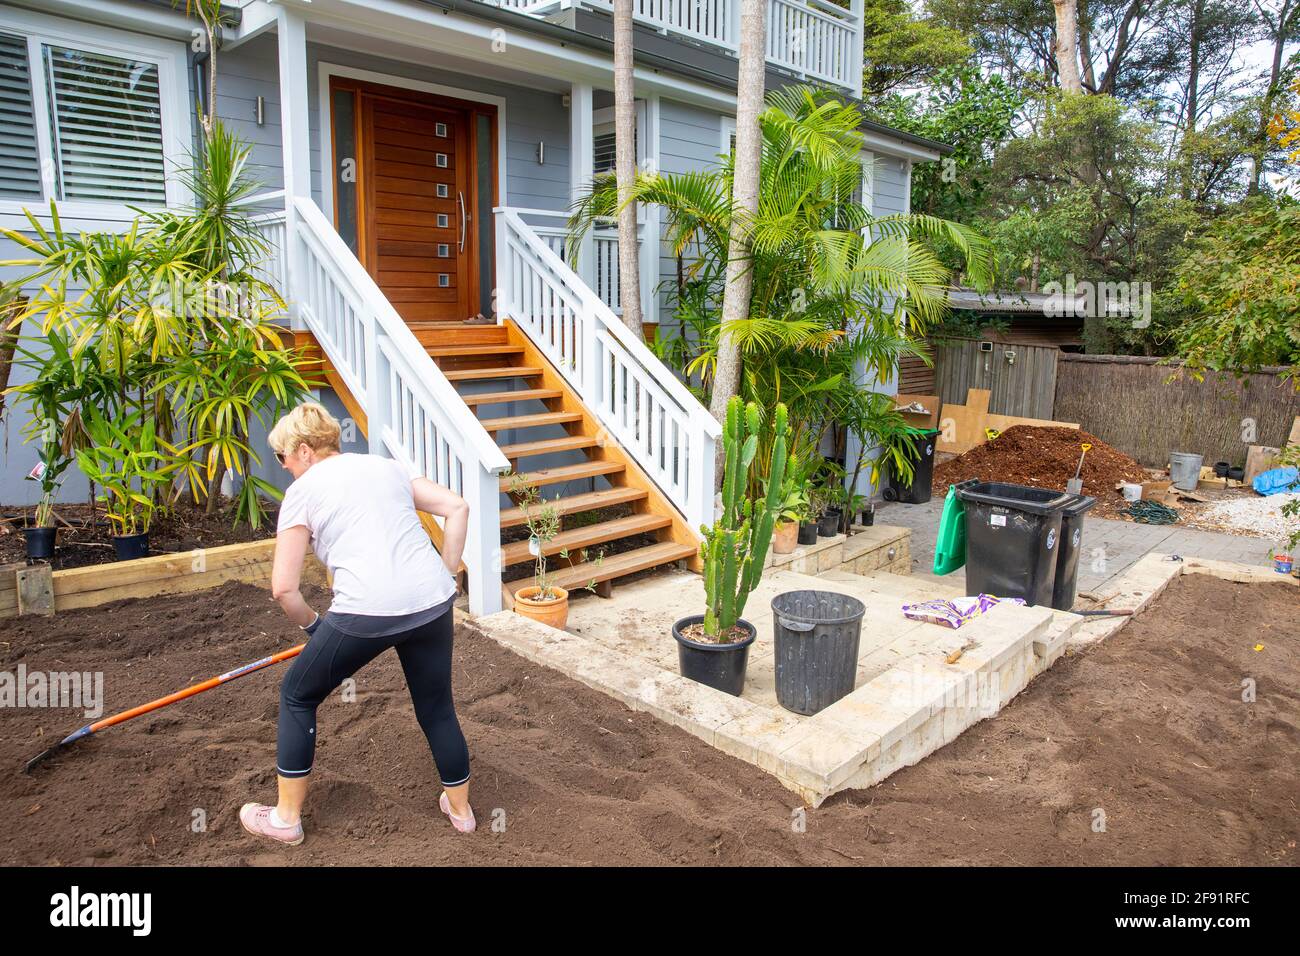 Australian blonde woman model released working on the garden at home raking soil to prepare for new lawn turf to be laid,Sydney,NSW,Australia Stock Photo